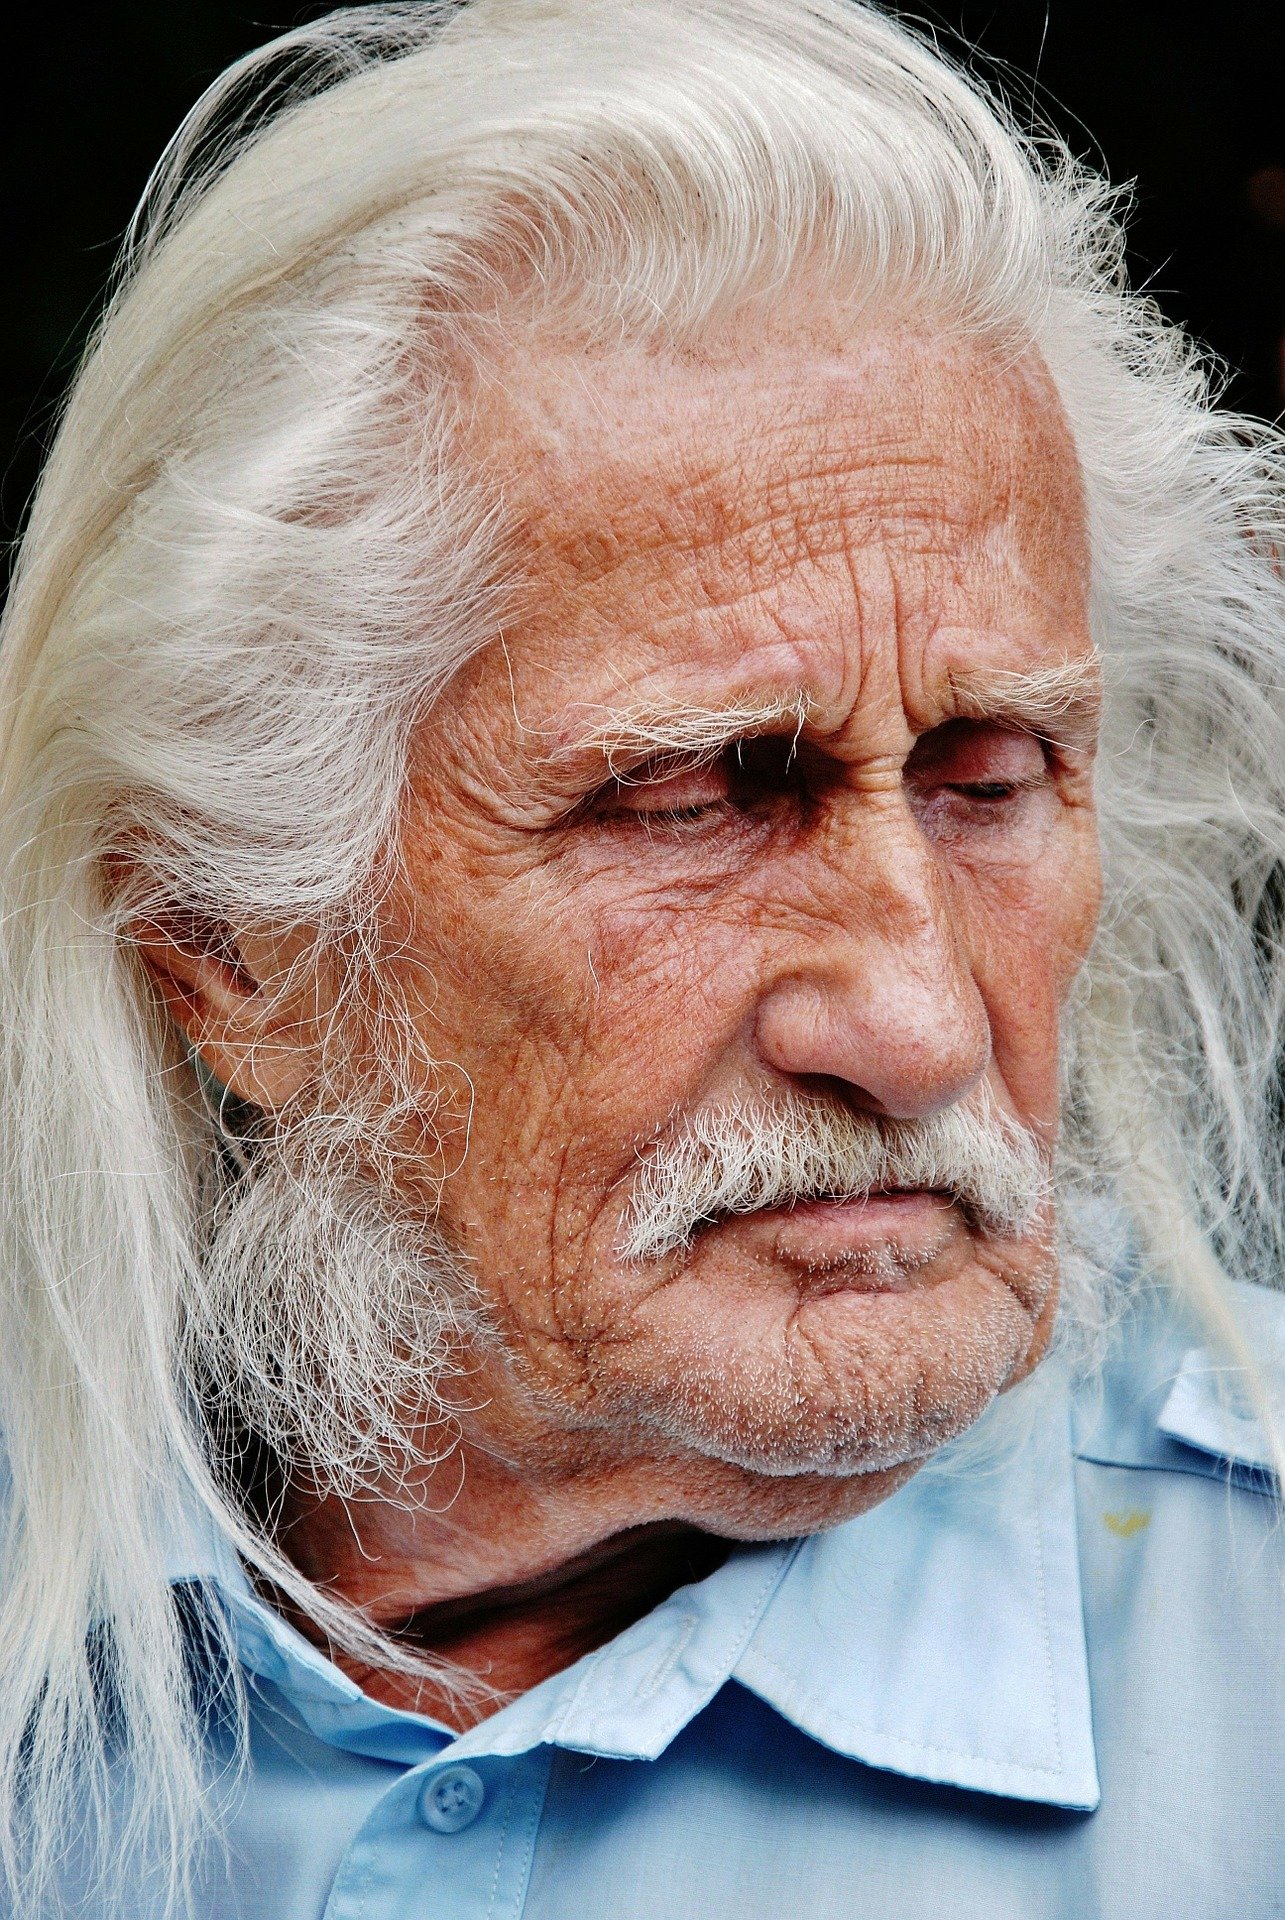 An old man with a sad expression on his face | Photo: Pixabay/GLady